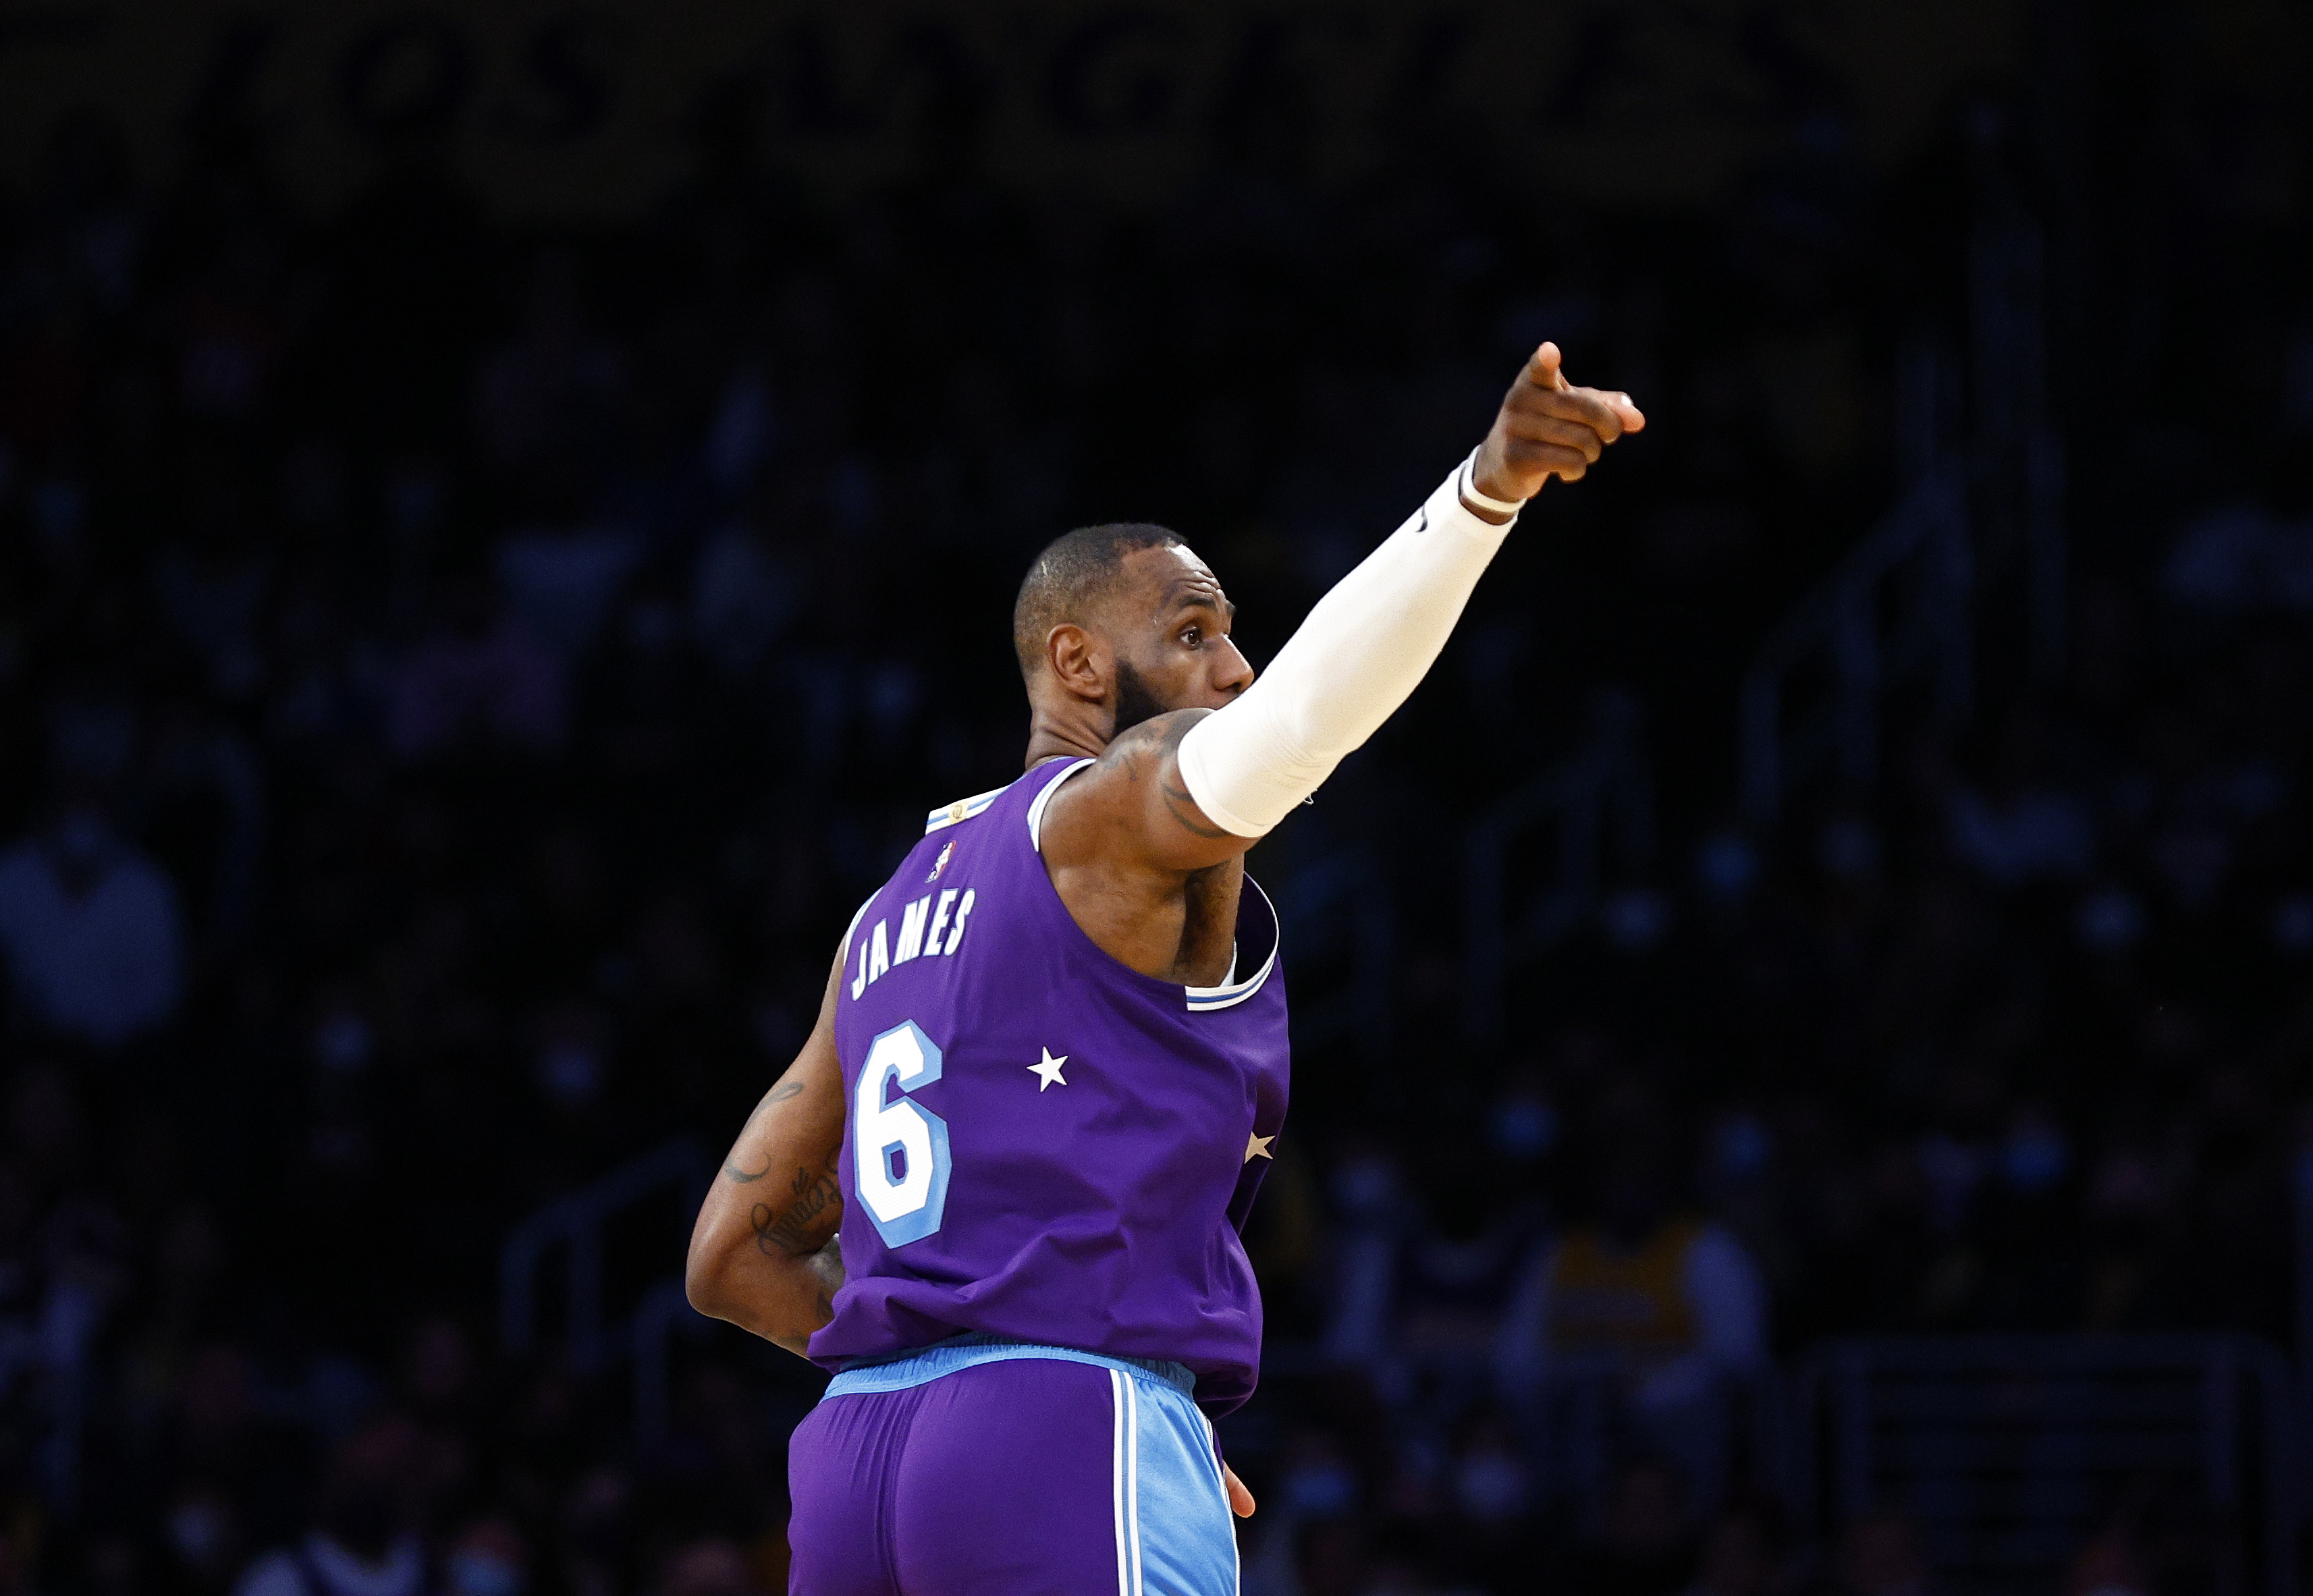 LeBron James points during an NBA game between the Los Angeles Lakers and New York Knicks in February 2022